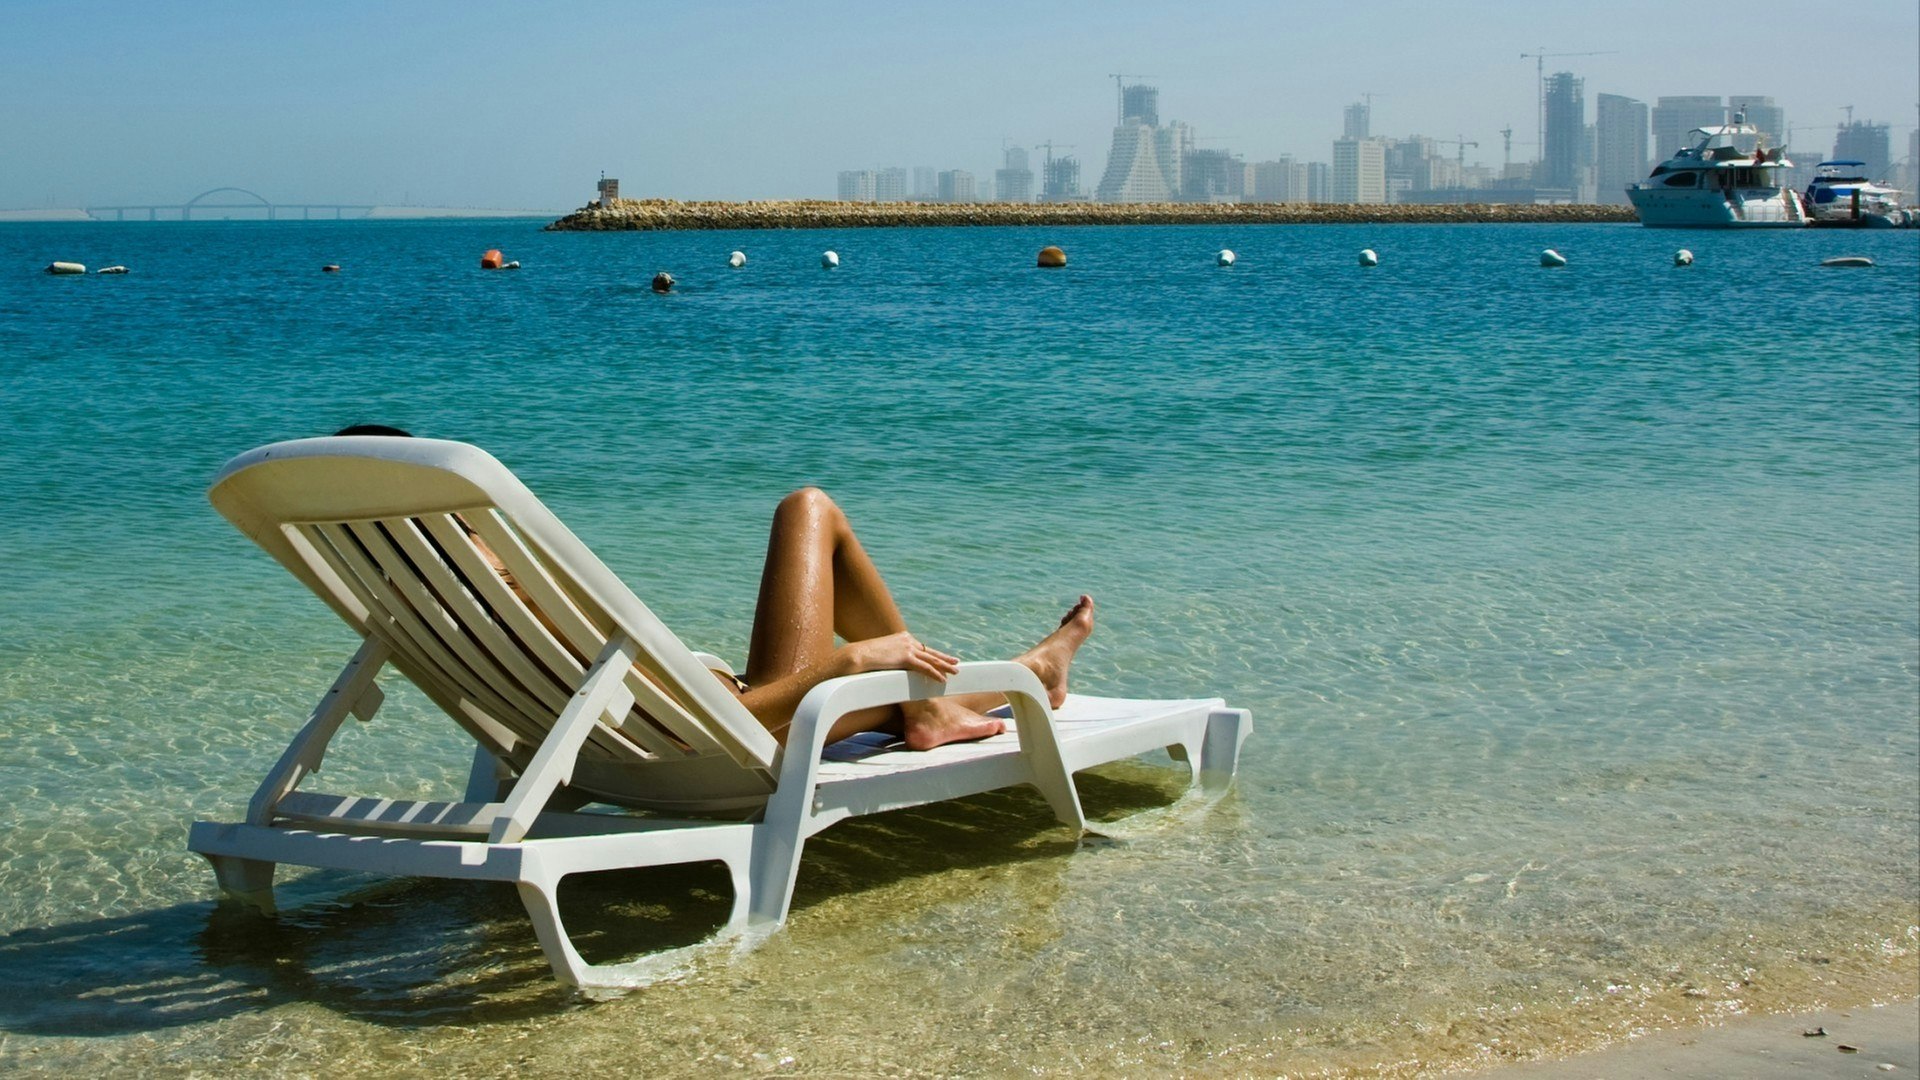 In Bahrain, a young woman rests on a sunbed in the Middle East